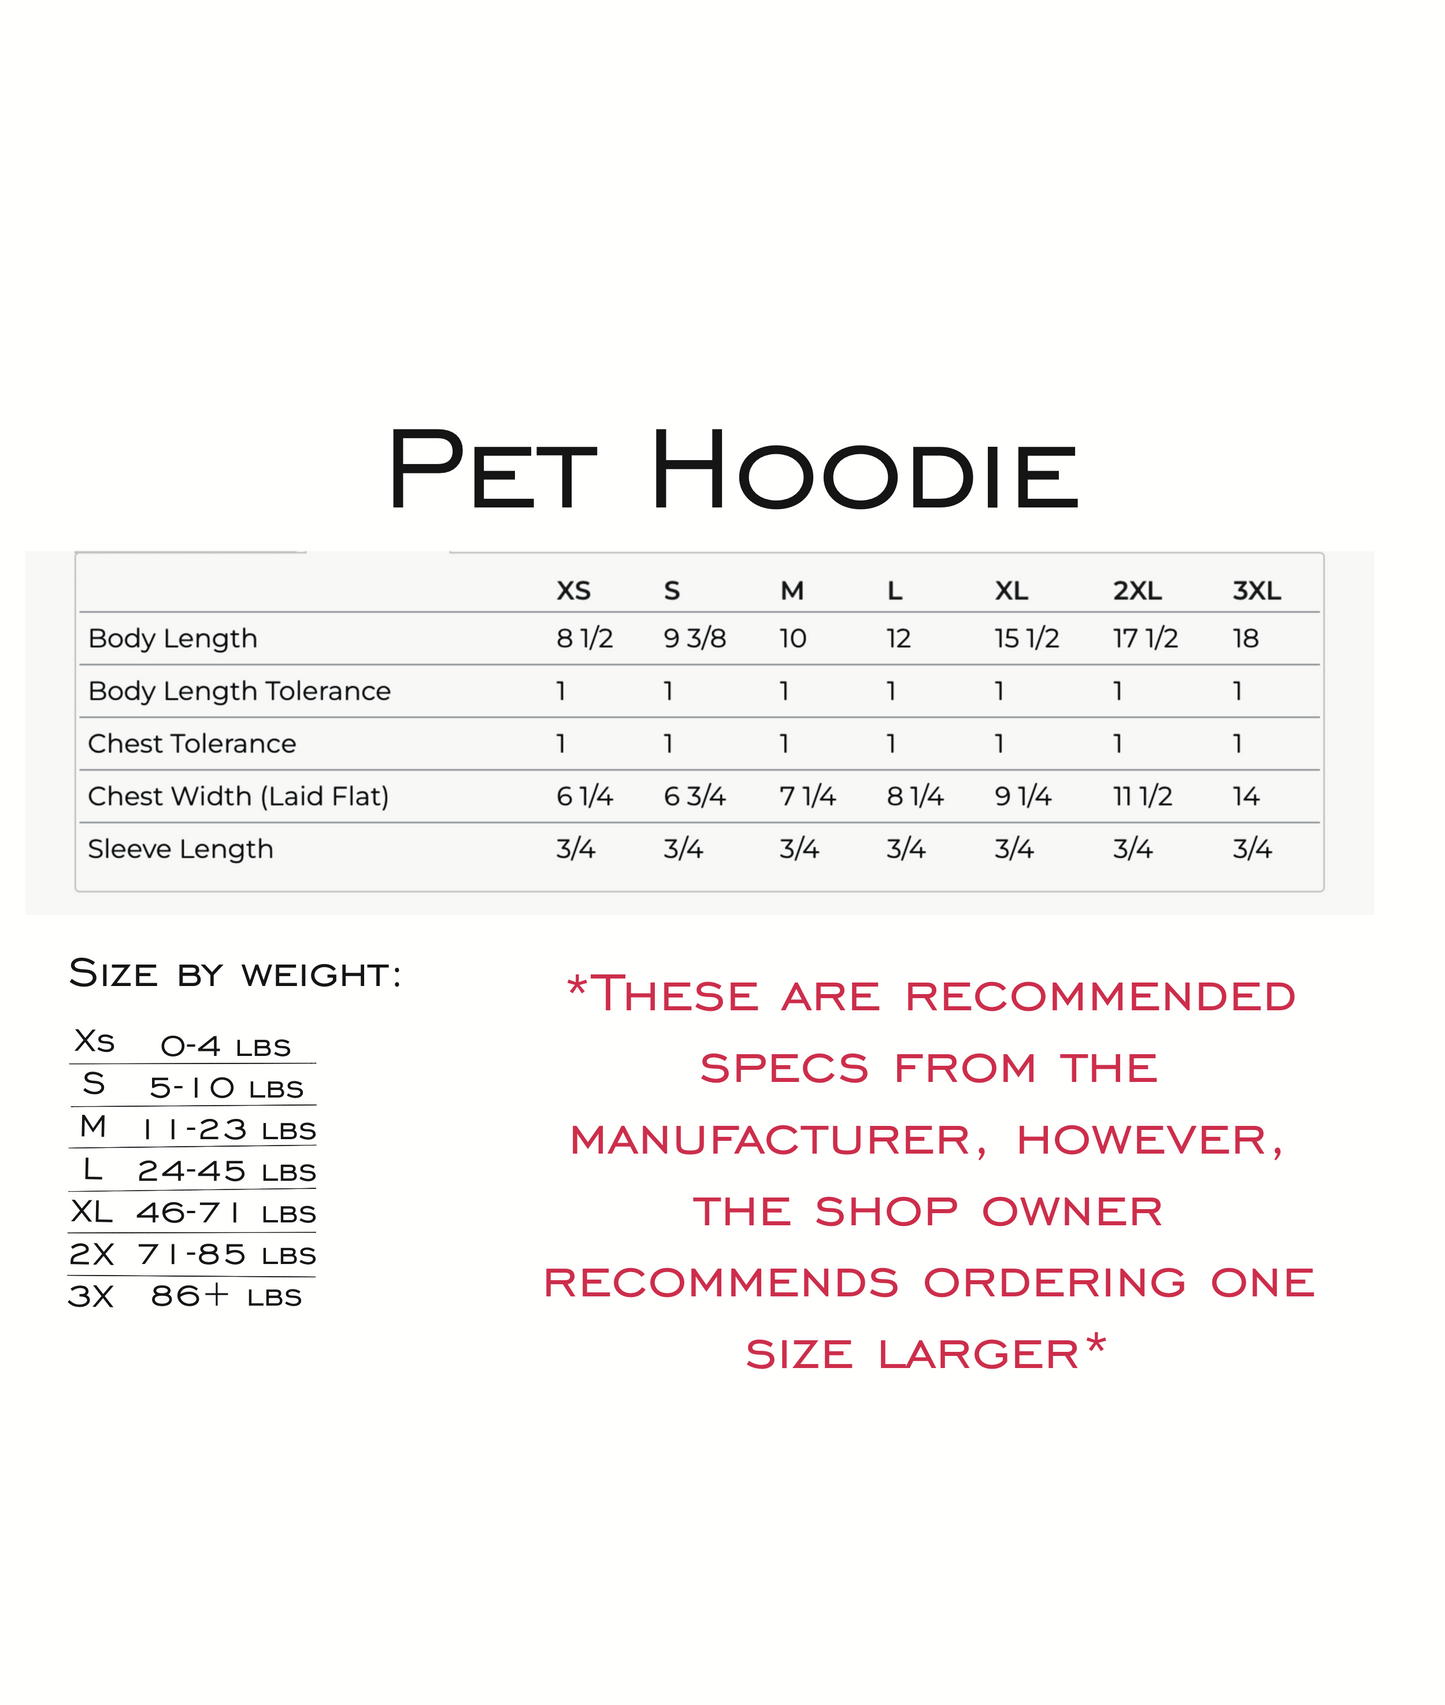 Pet Hoodie: Dare to be Different